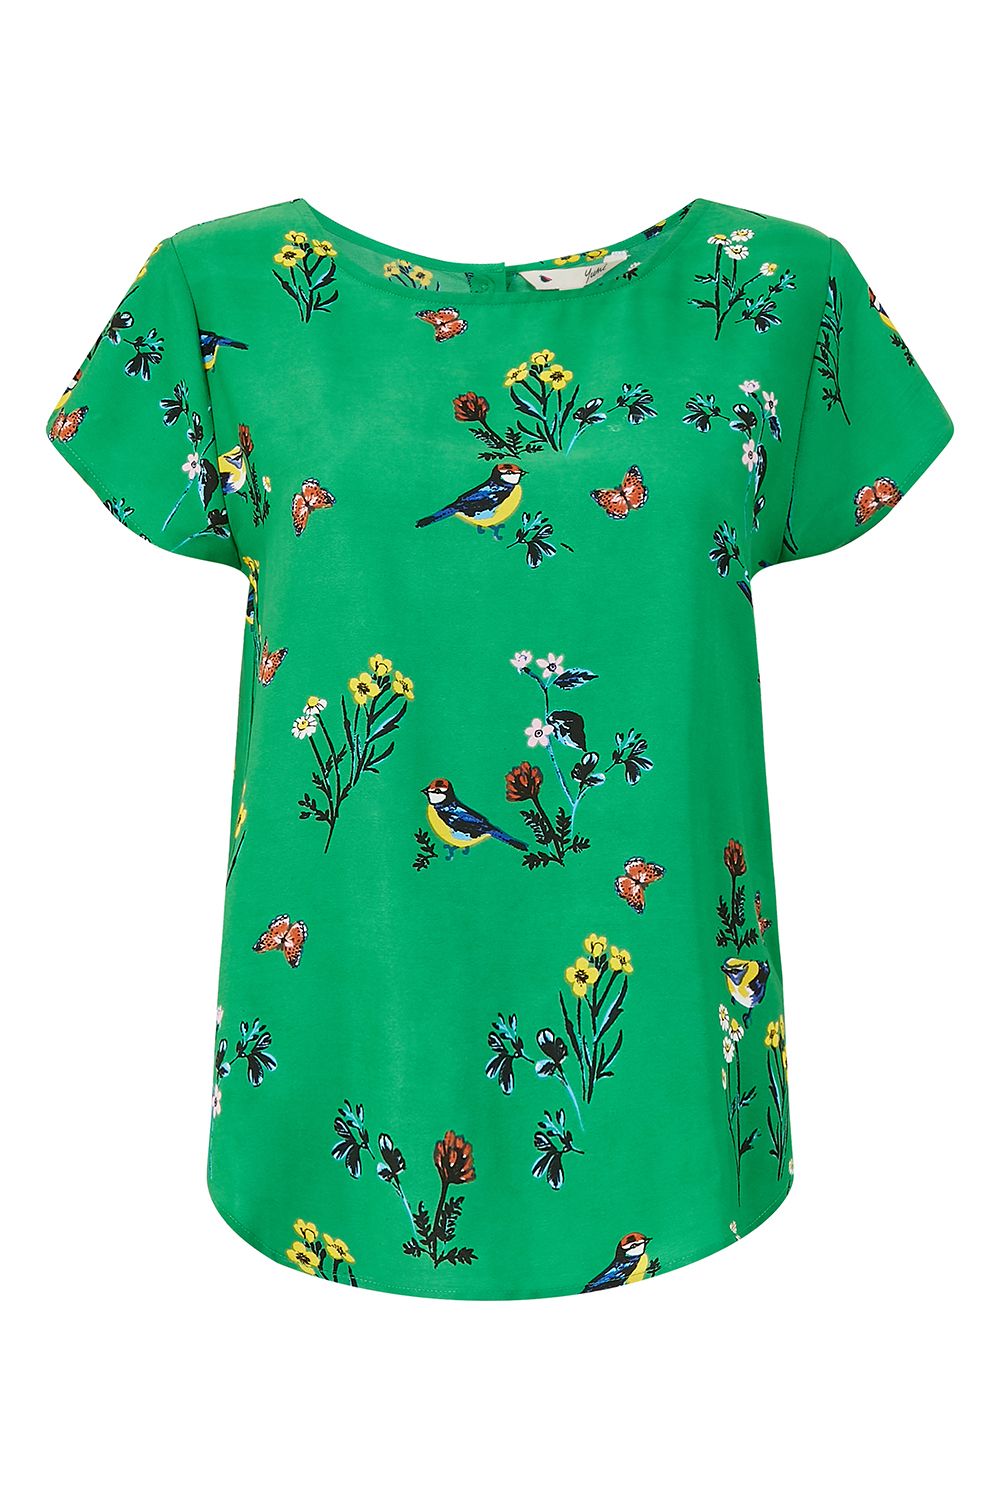 This Yumi Green Bird Print Short Sleeve Top is stylish, elegant and practical. Features a delicate bird print and bold green base. Match wide legged trousers or skinny jeans to complete the look.